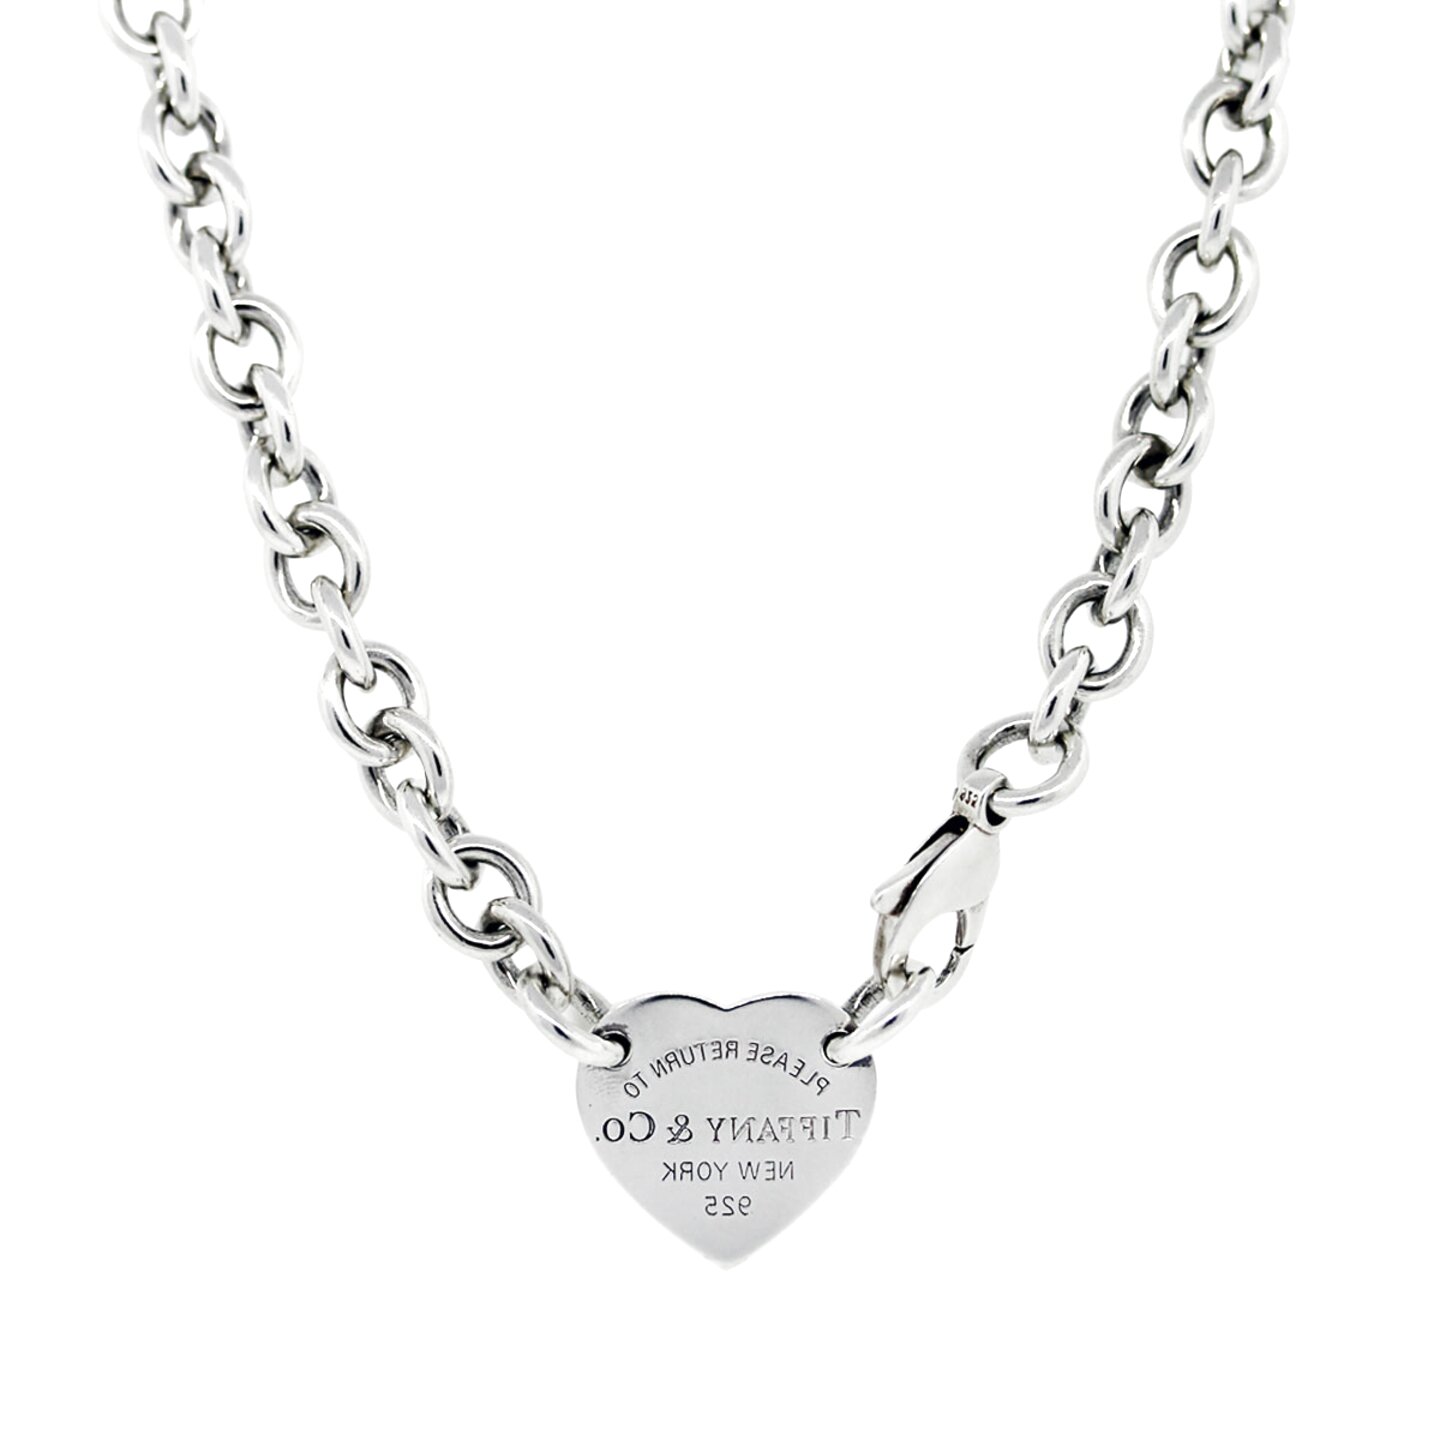 Tiffany Necklace for sale in UK | 57 used Tiffany Necklaces